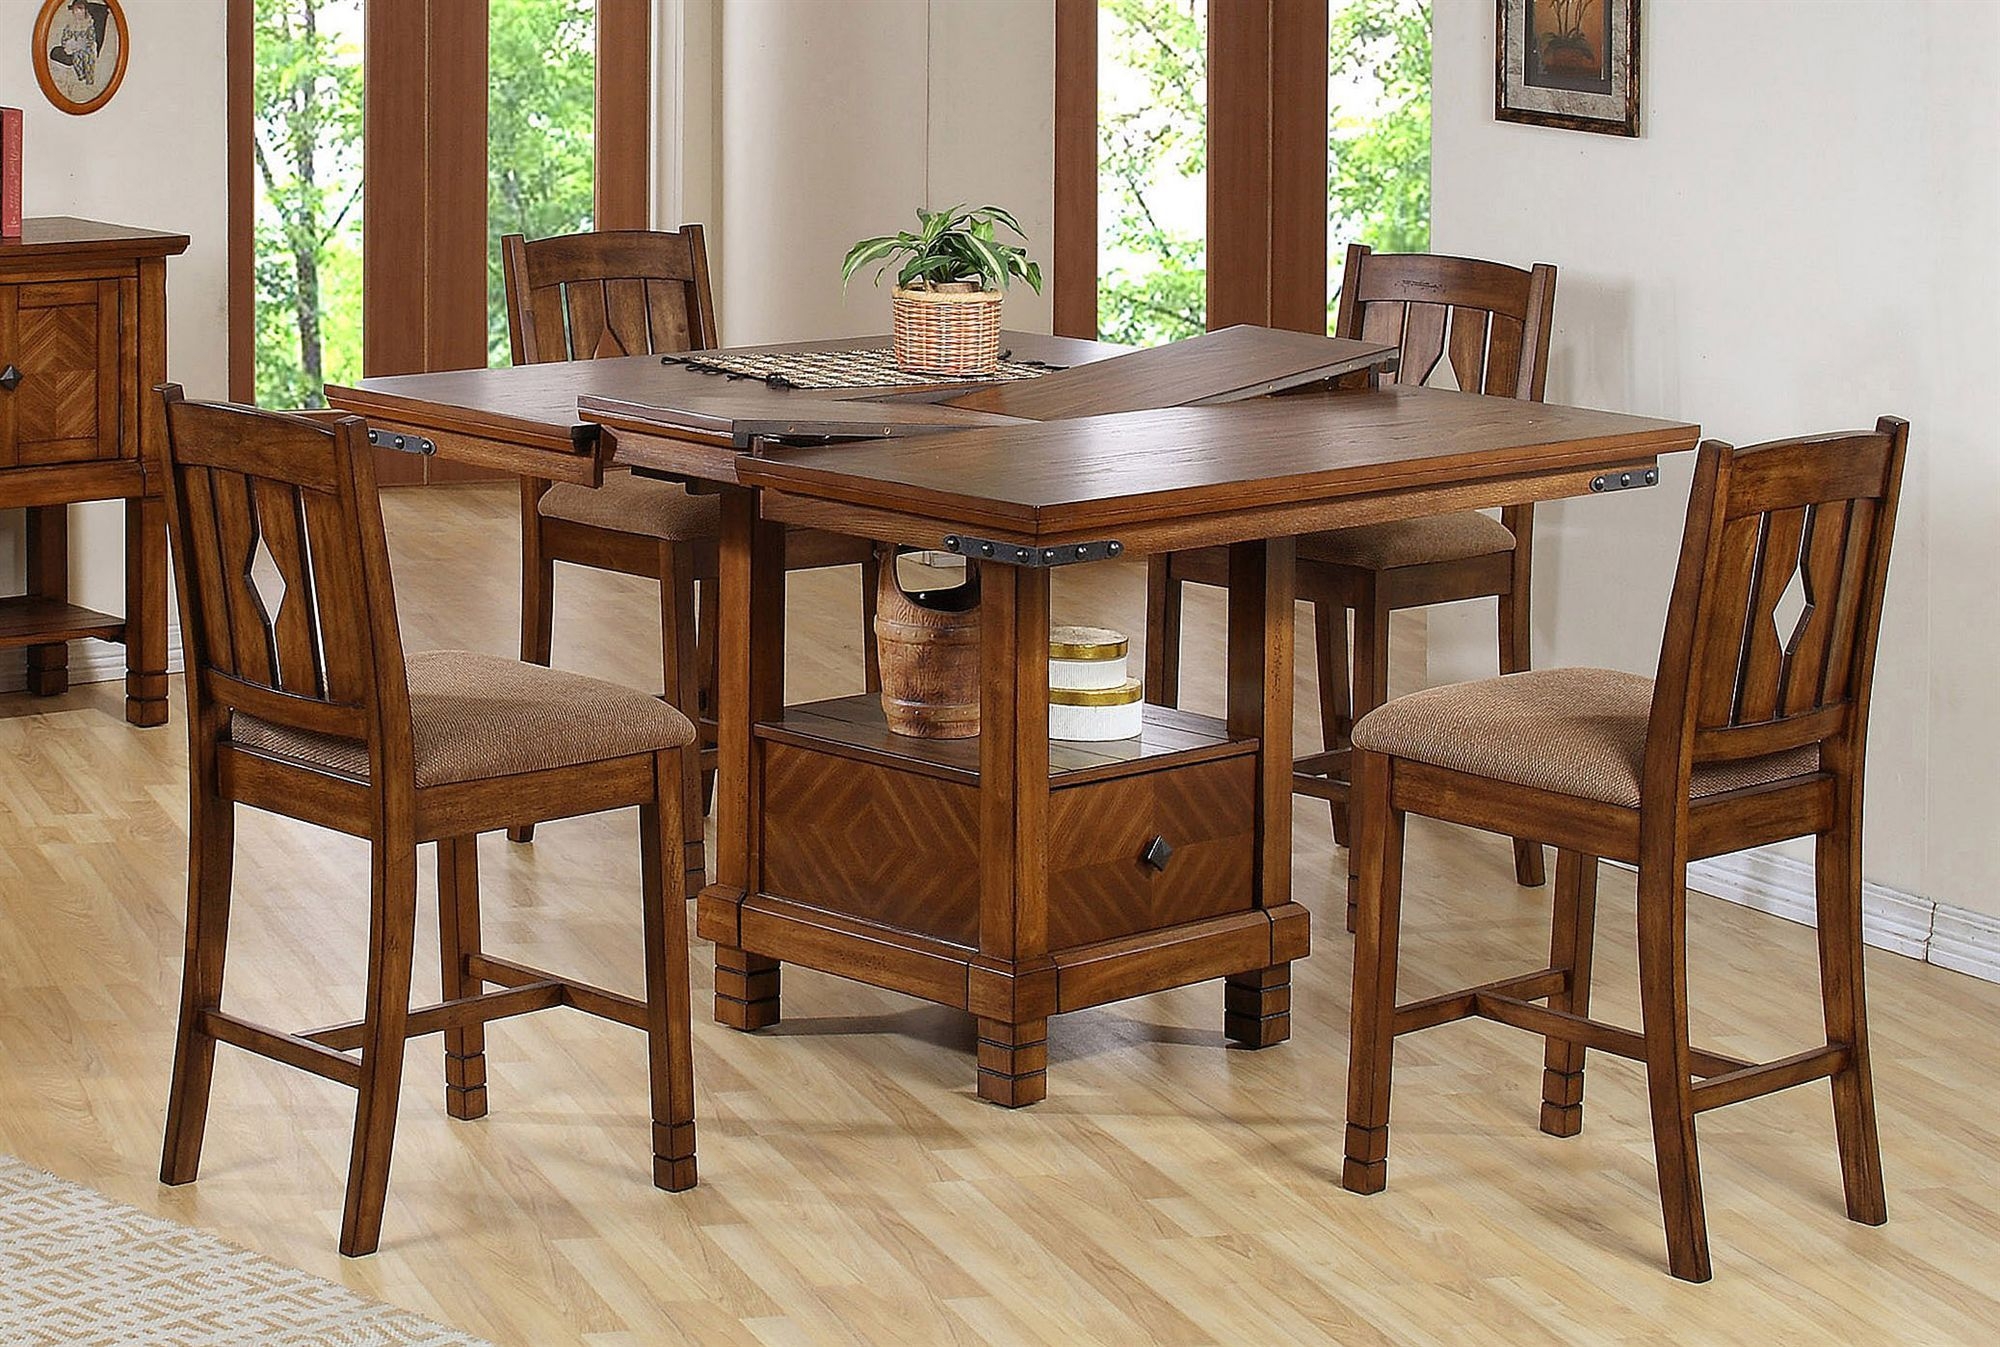 Butterfly Leaf Dining Table Set Ideas on Foter